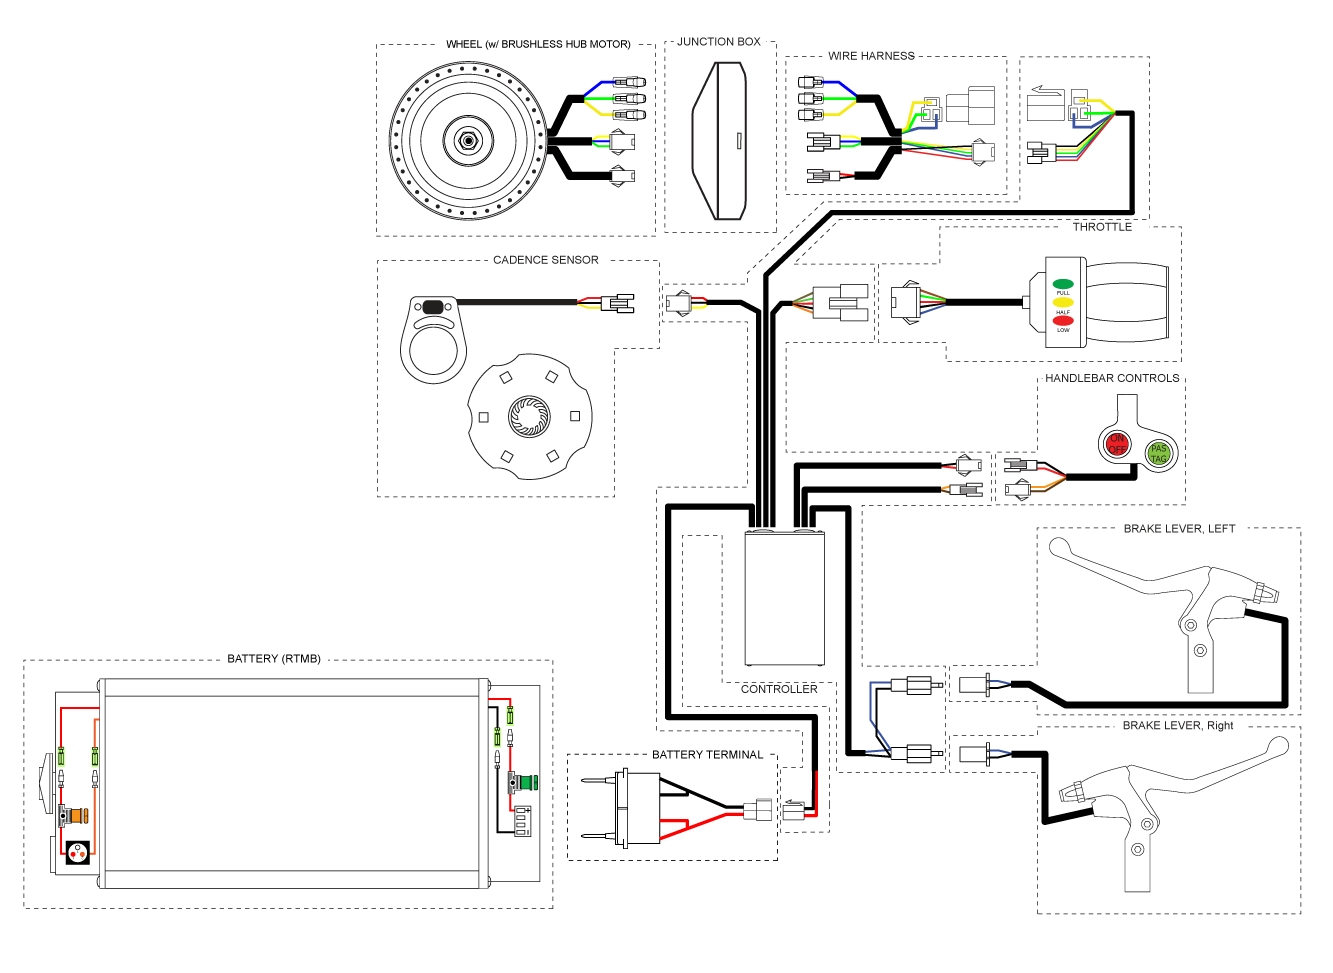 Wiring Diagram For Motorized Bicycle | Wiring Diagram - Motorized Bicycle Wiring Diagram